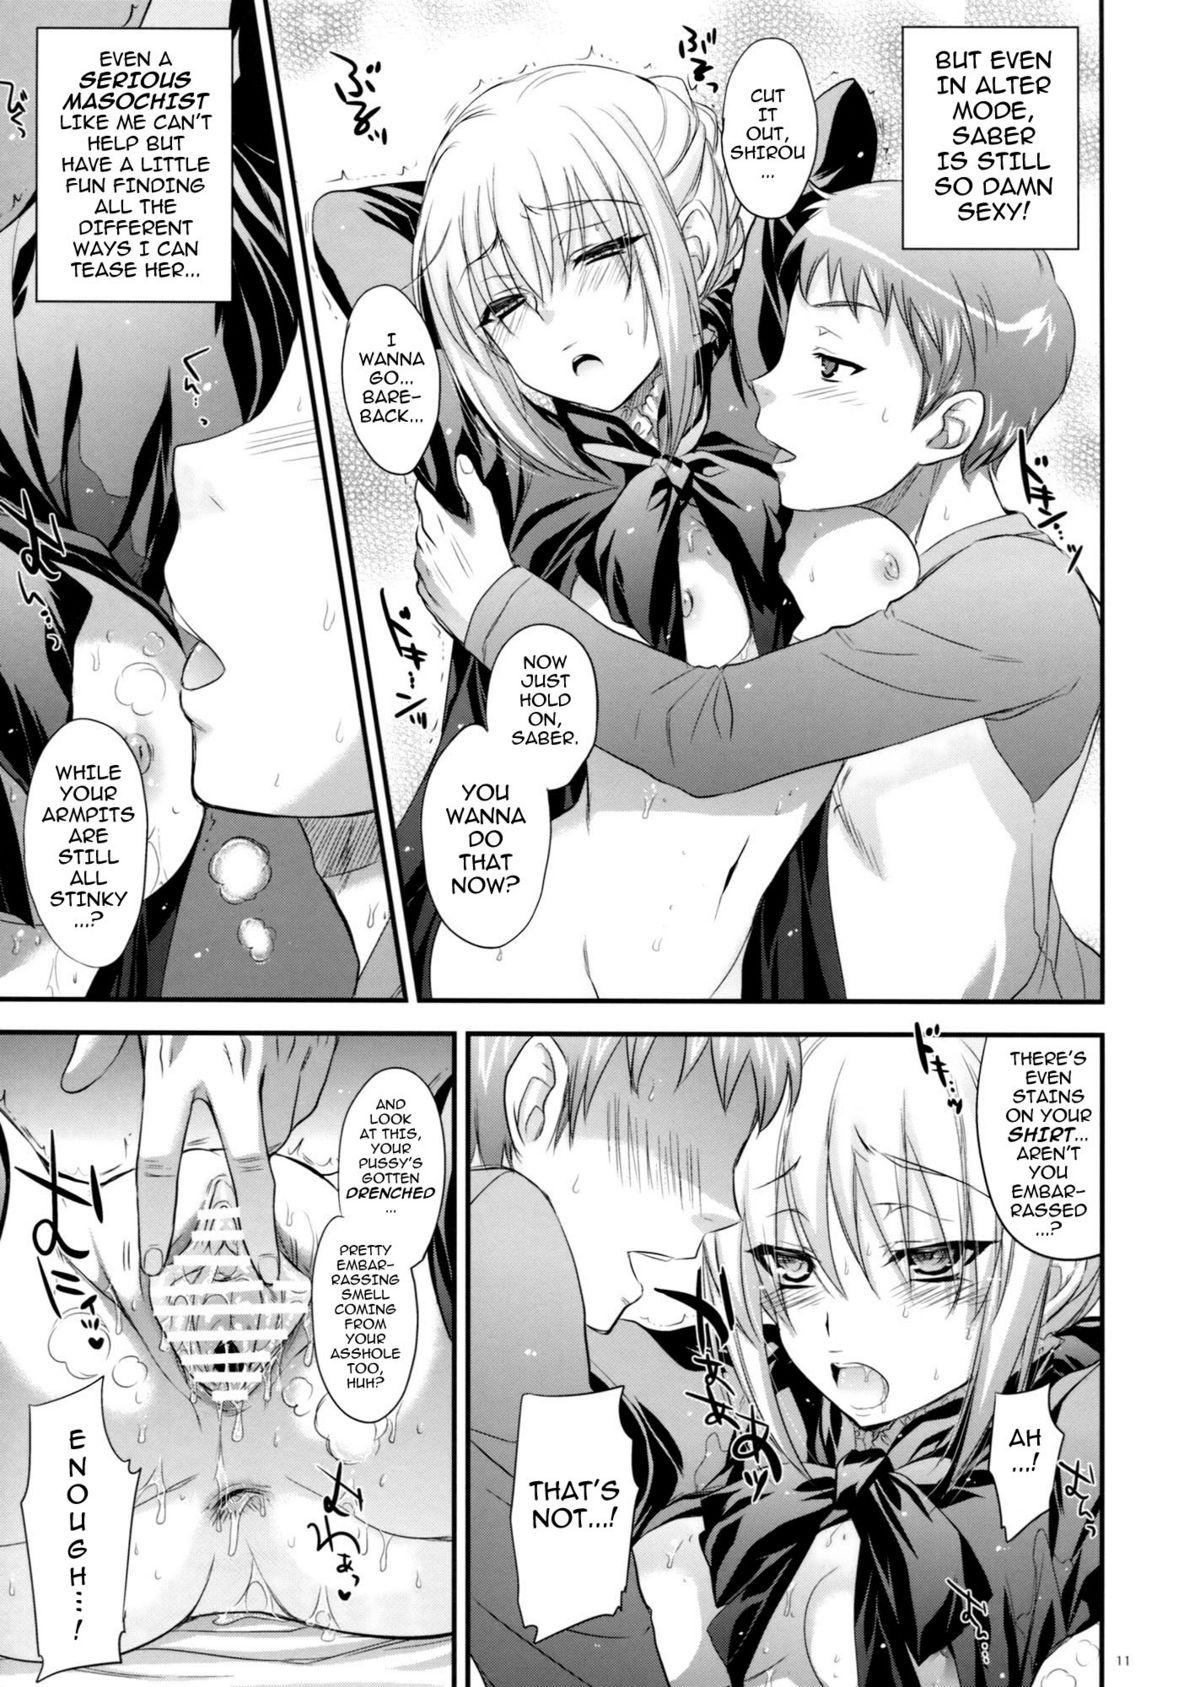 Suck GARIGARI 41 - Fate stay night Tight Cunt - Page 10